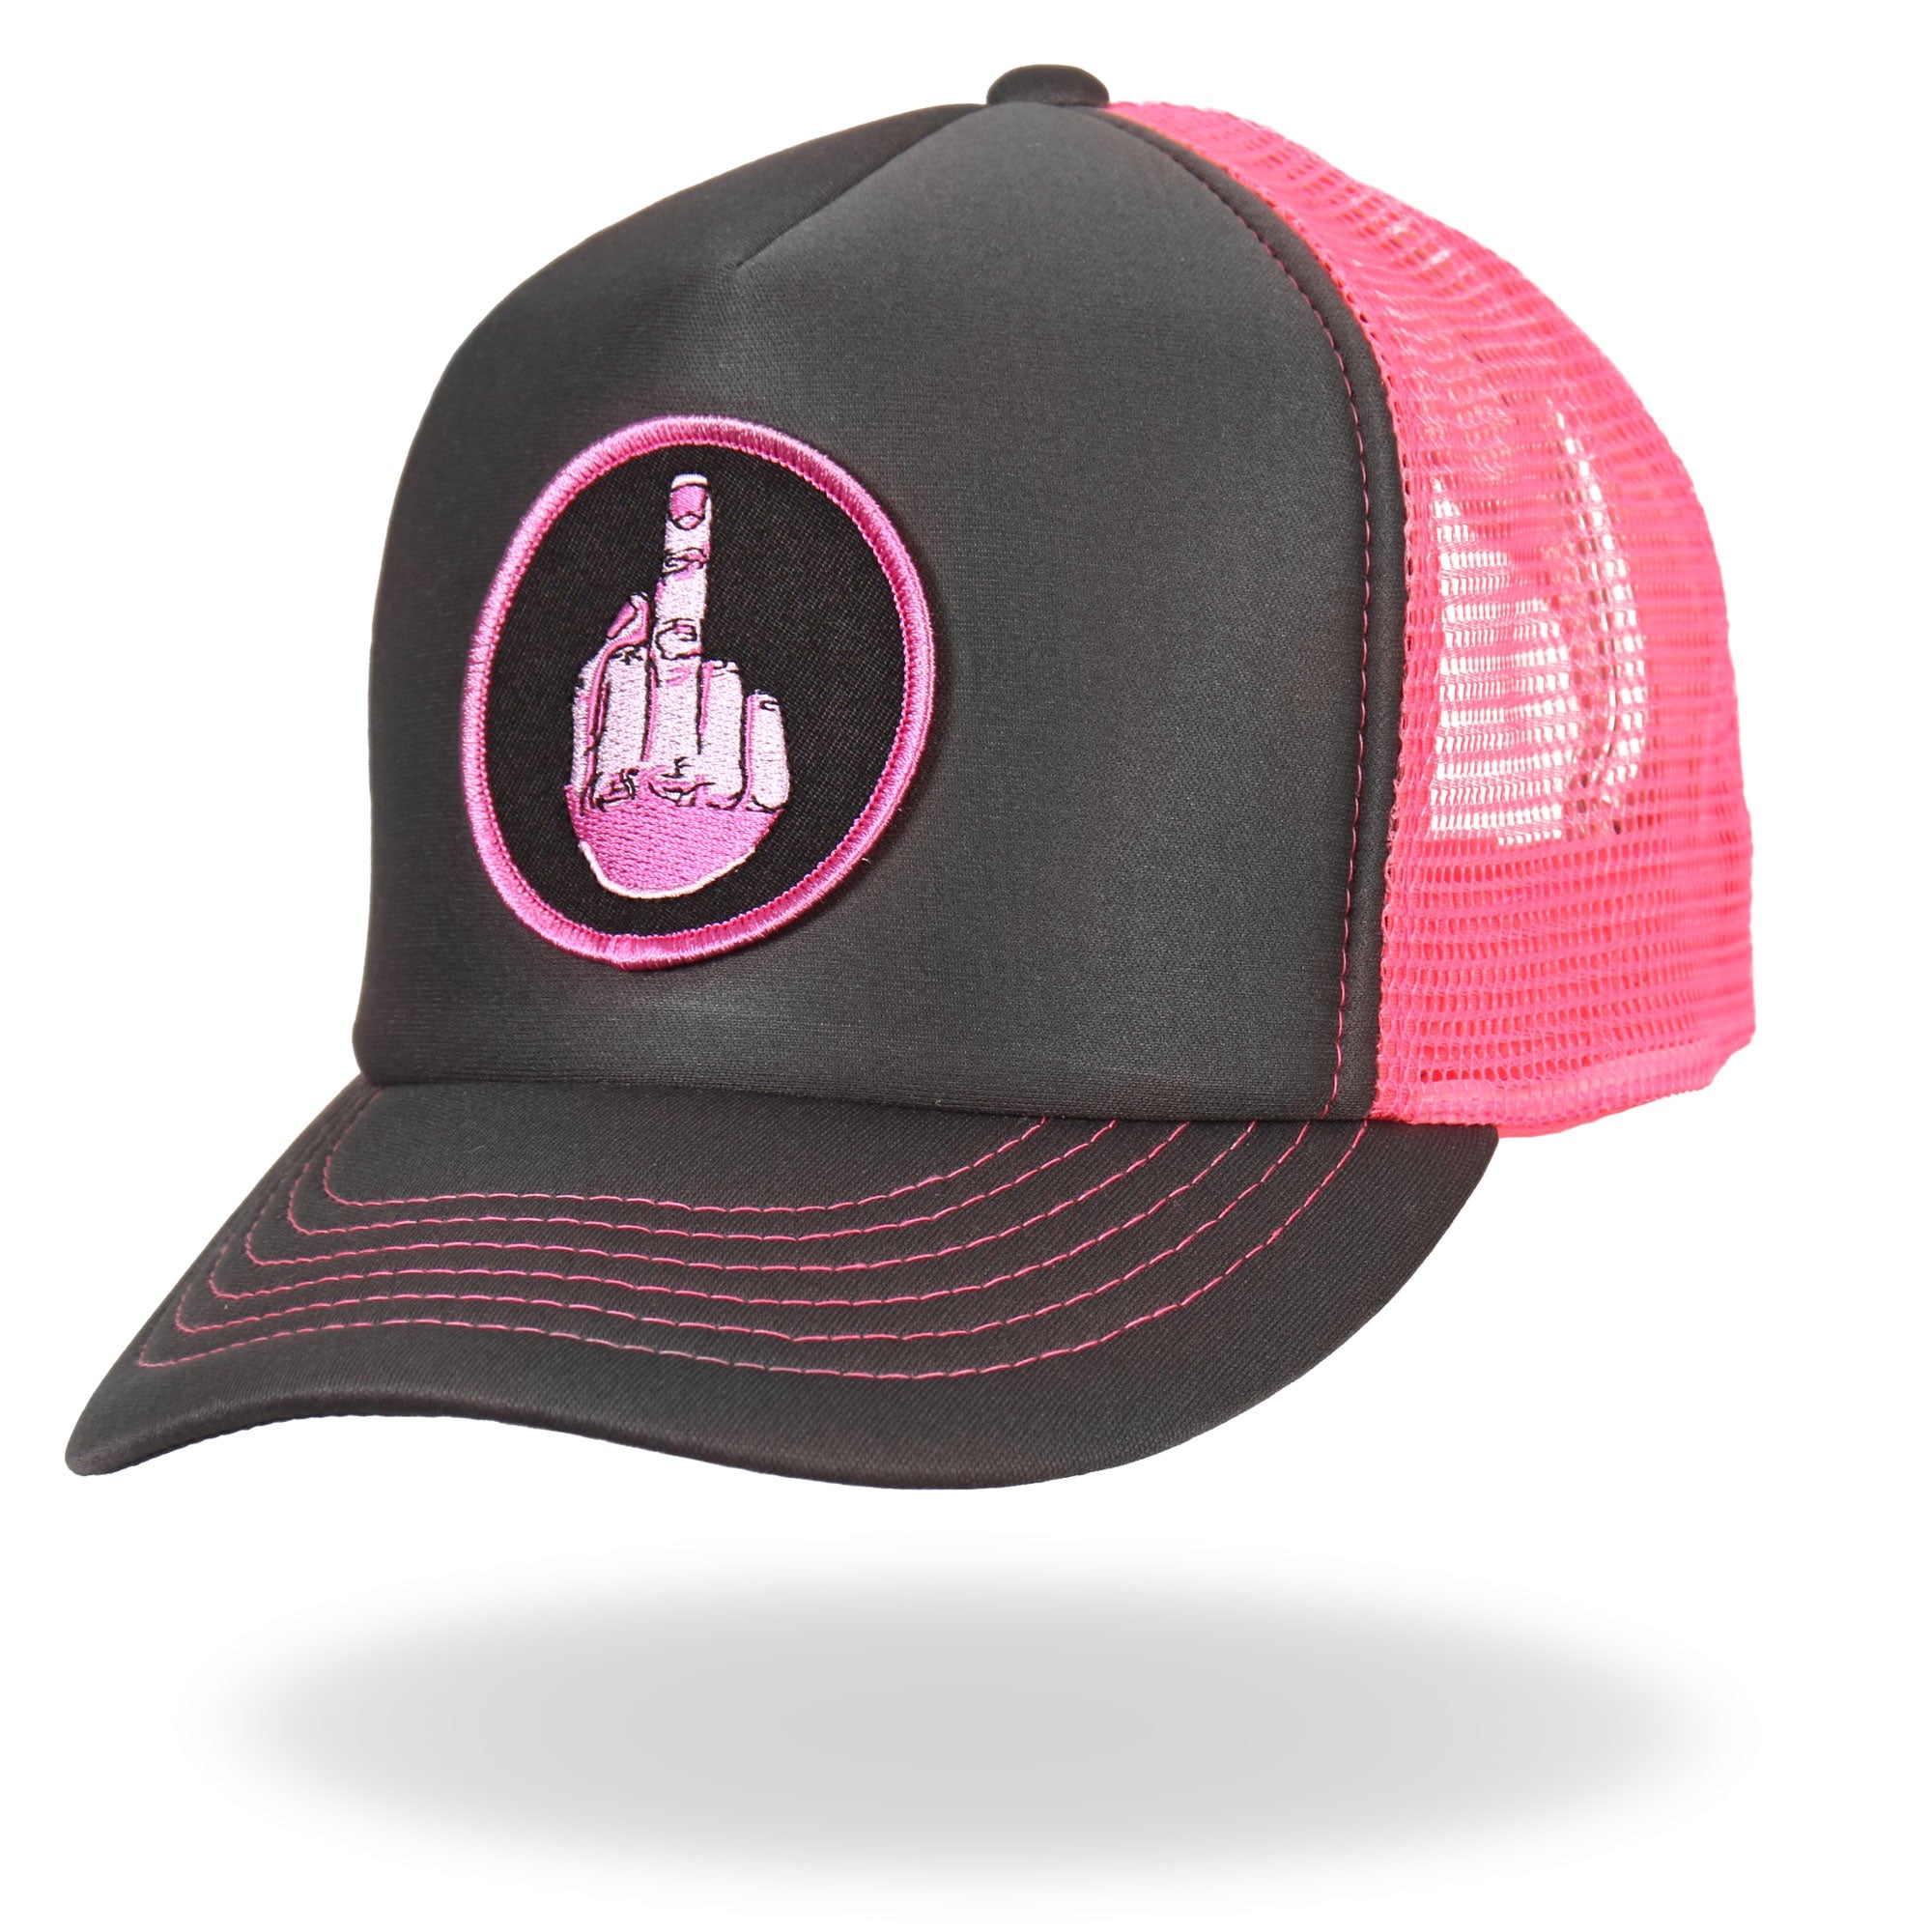 Hot Leathers GSH1001 Middle Finger Grey and Pink Trucker Hat